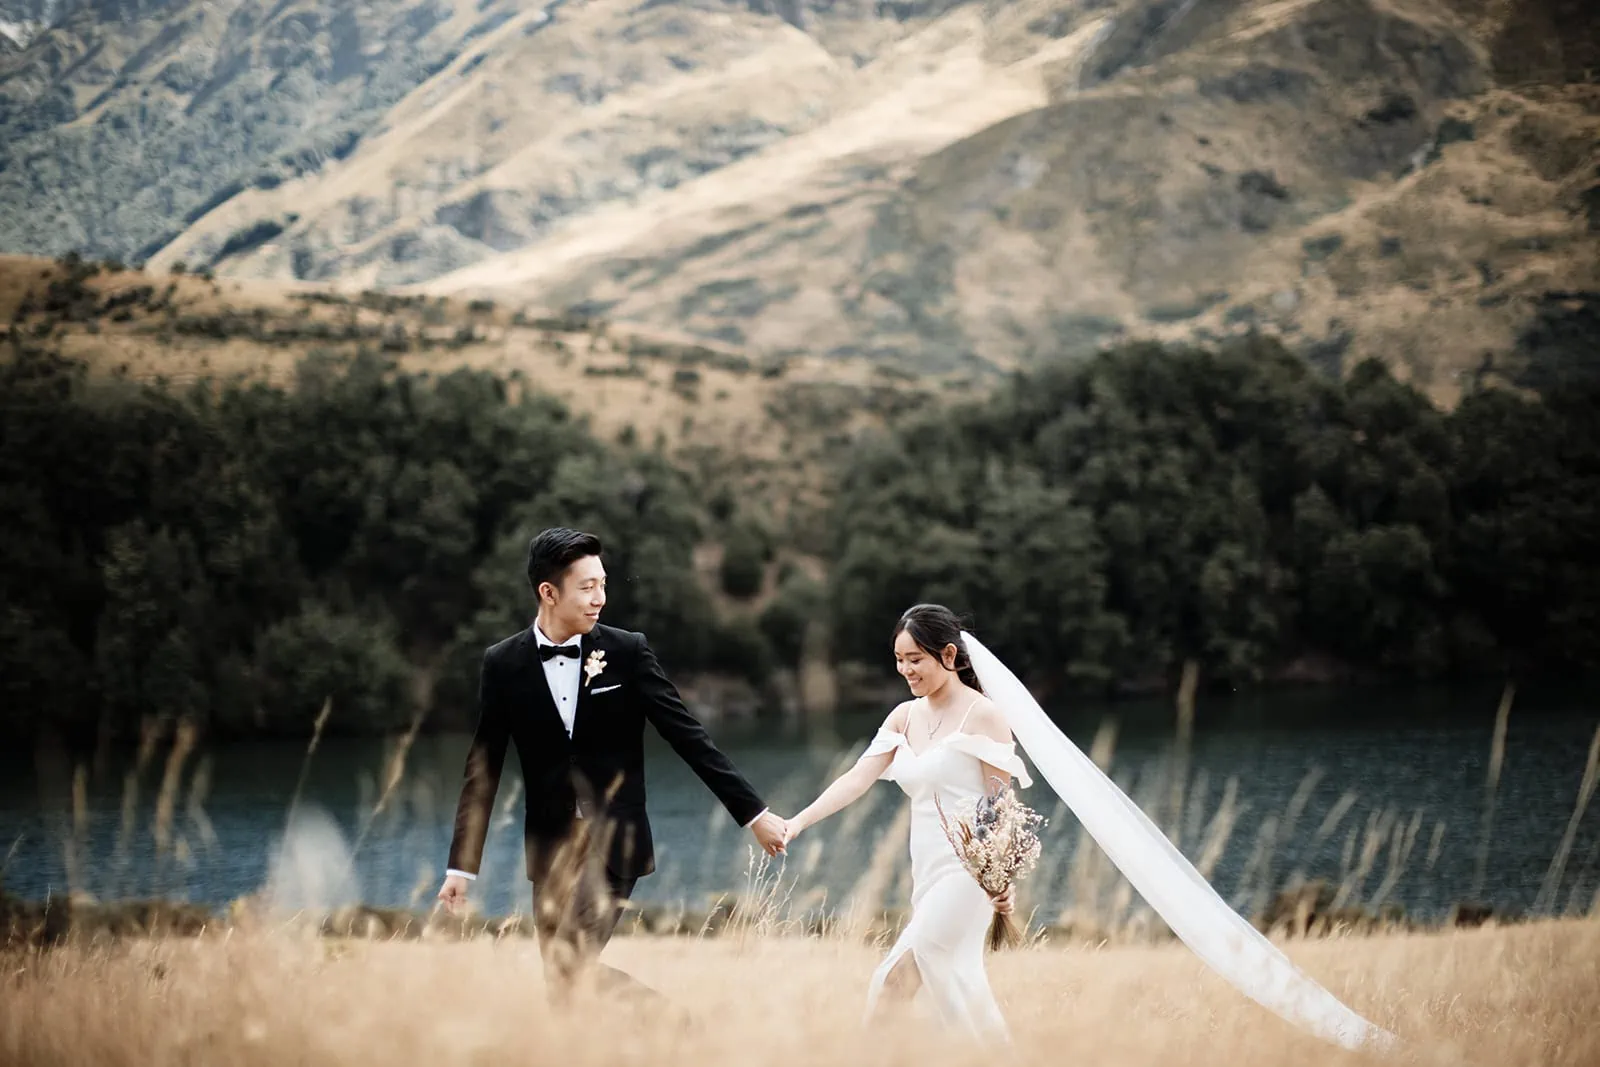 A bride and groom walking through a field with mountains in the background during their Queenstown Heli Pre Wedding at Cecil Peak.